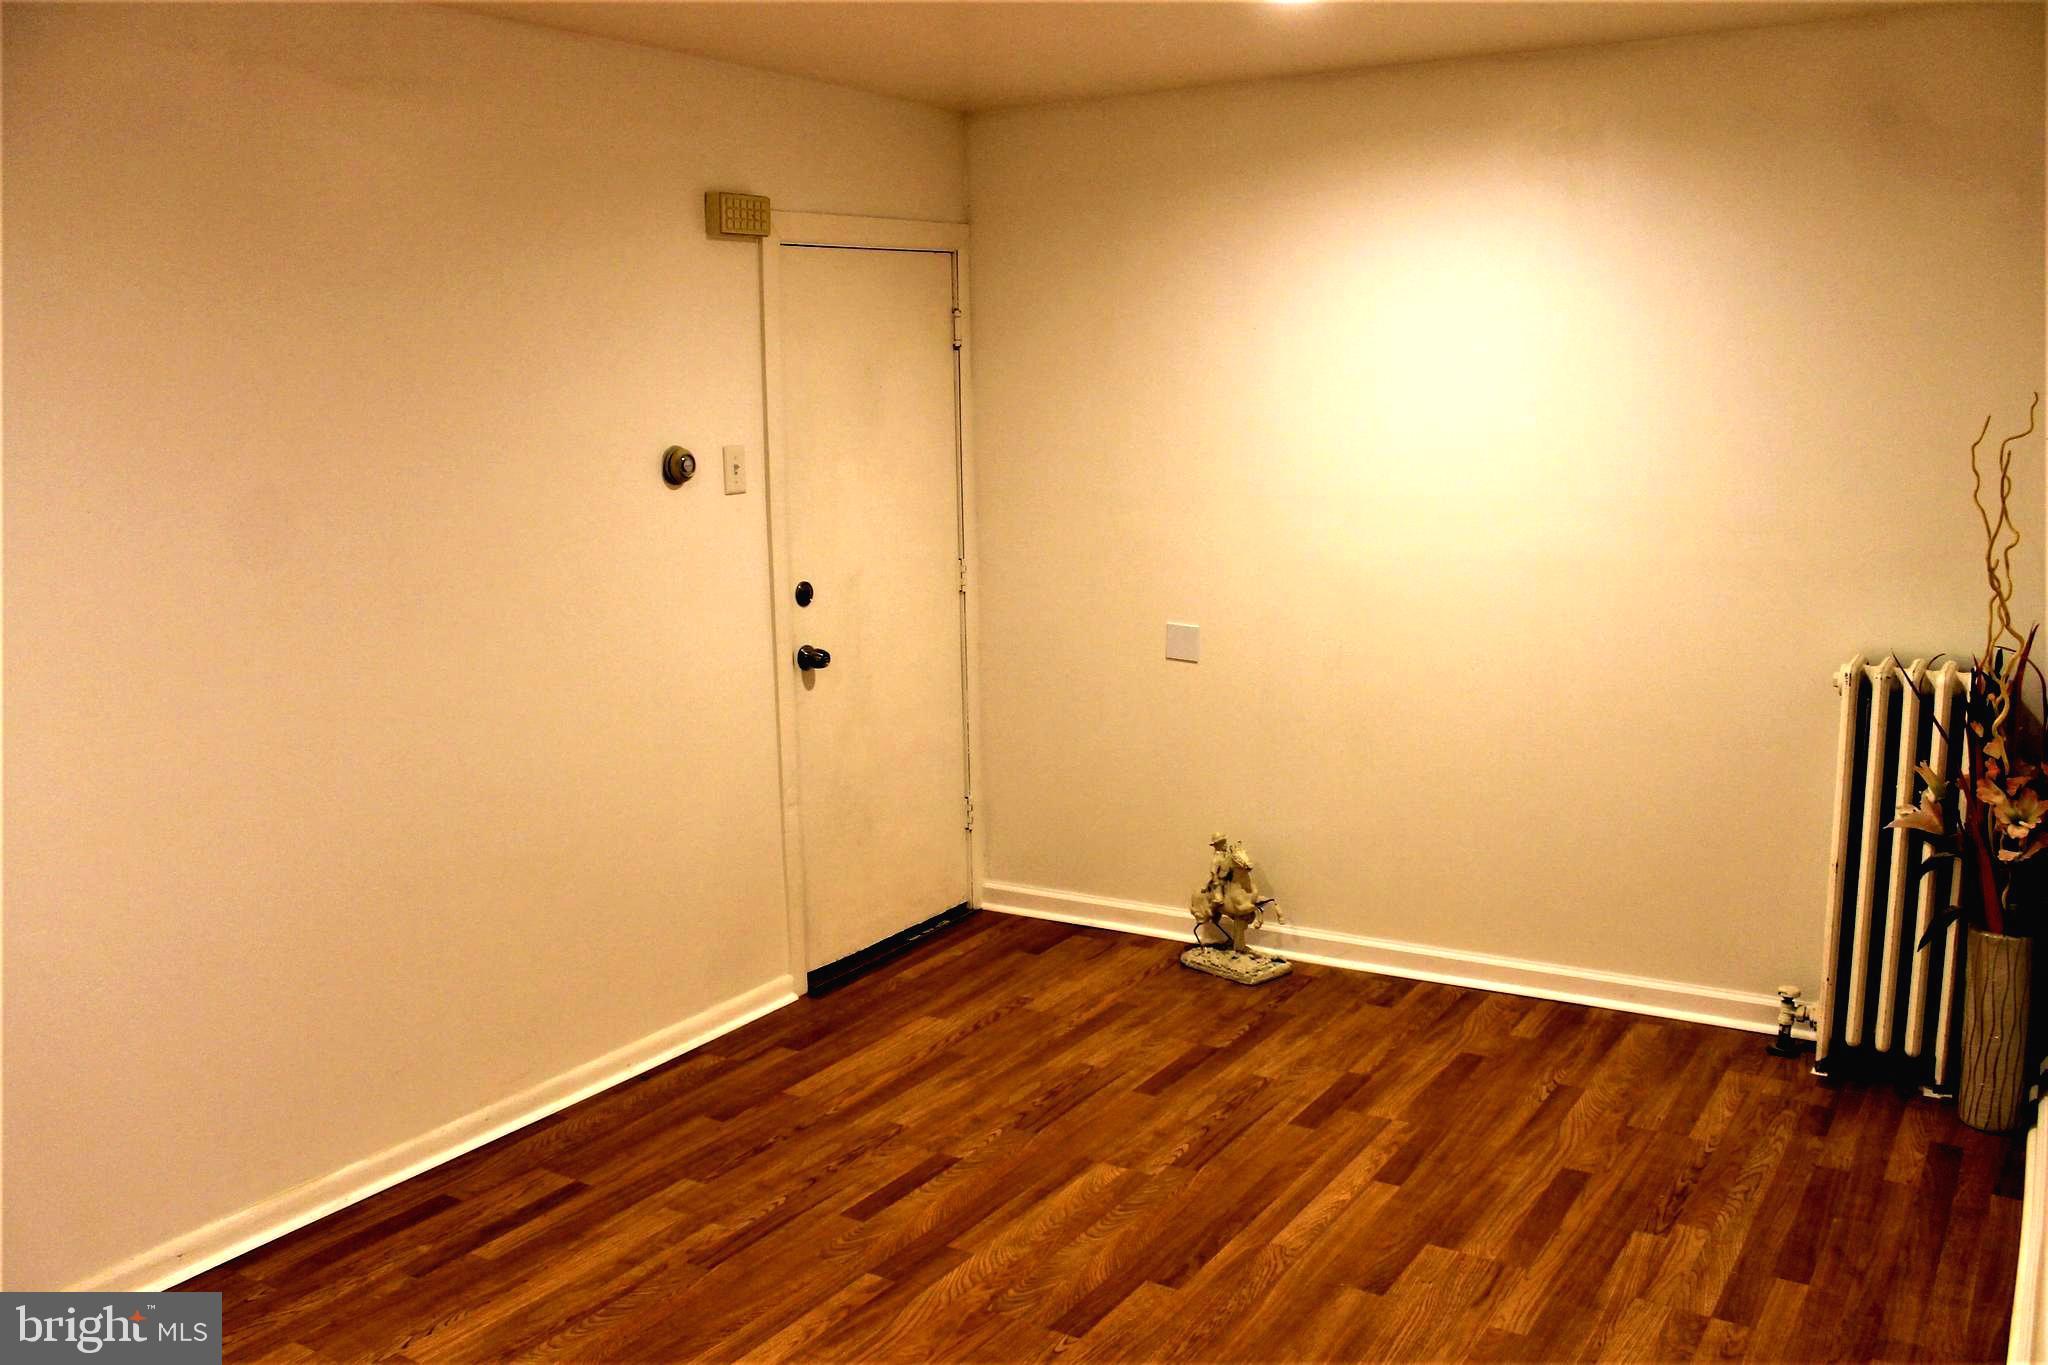 a view of a room with wooden floor and fence